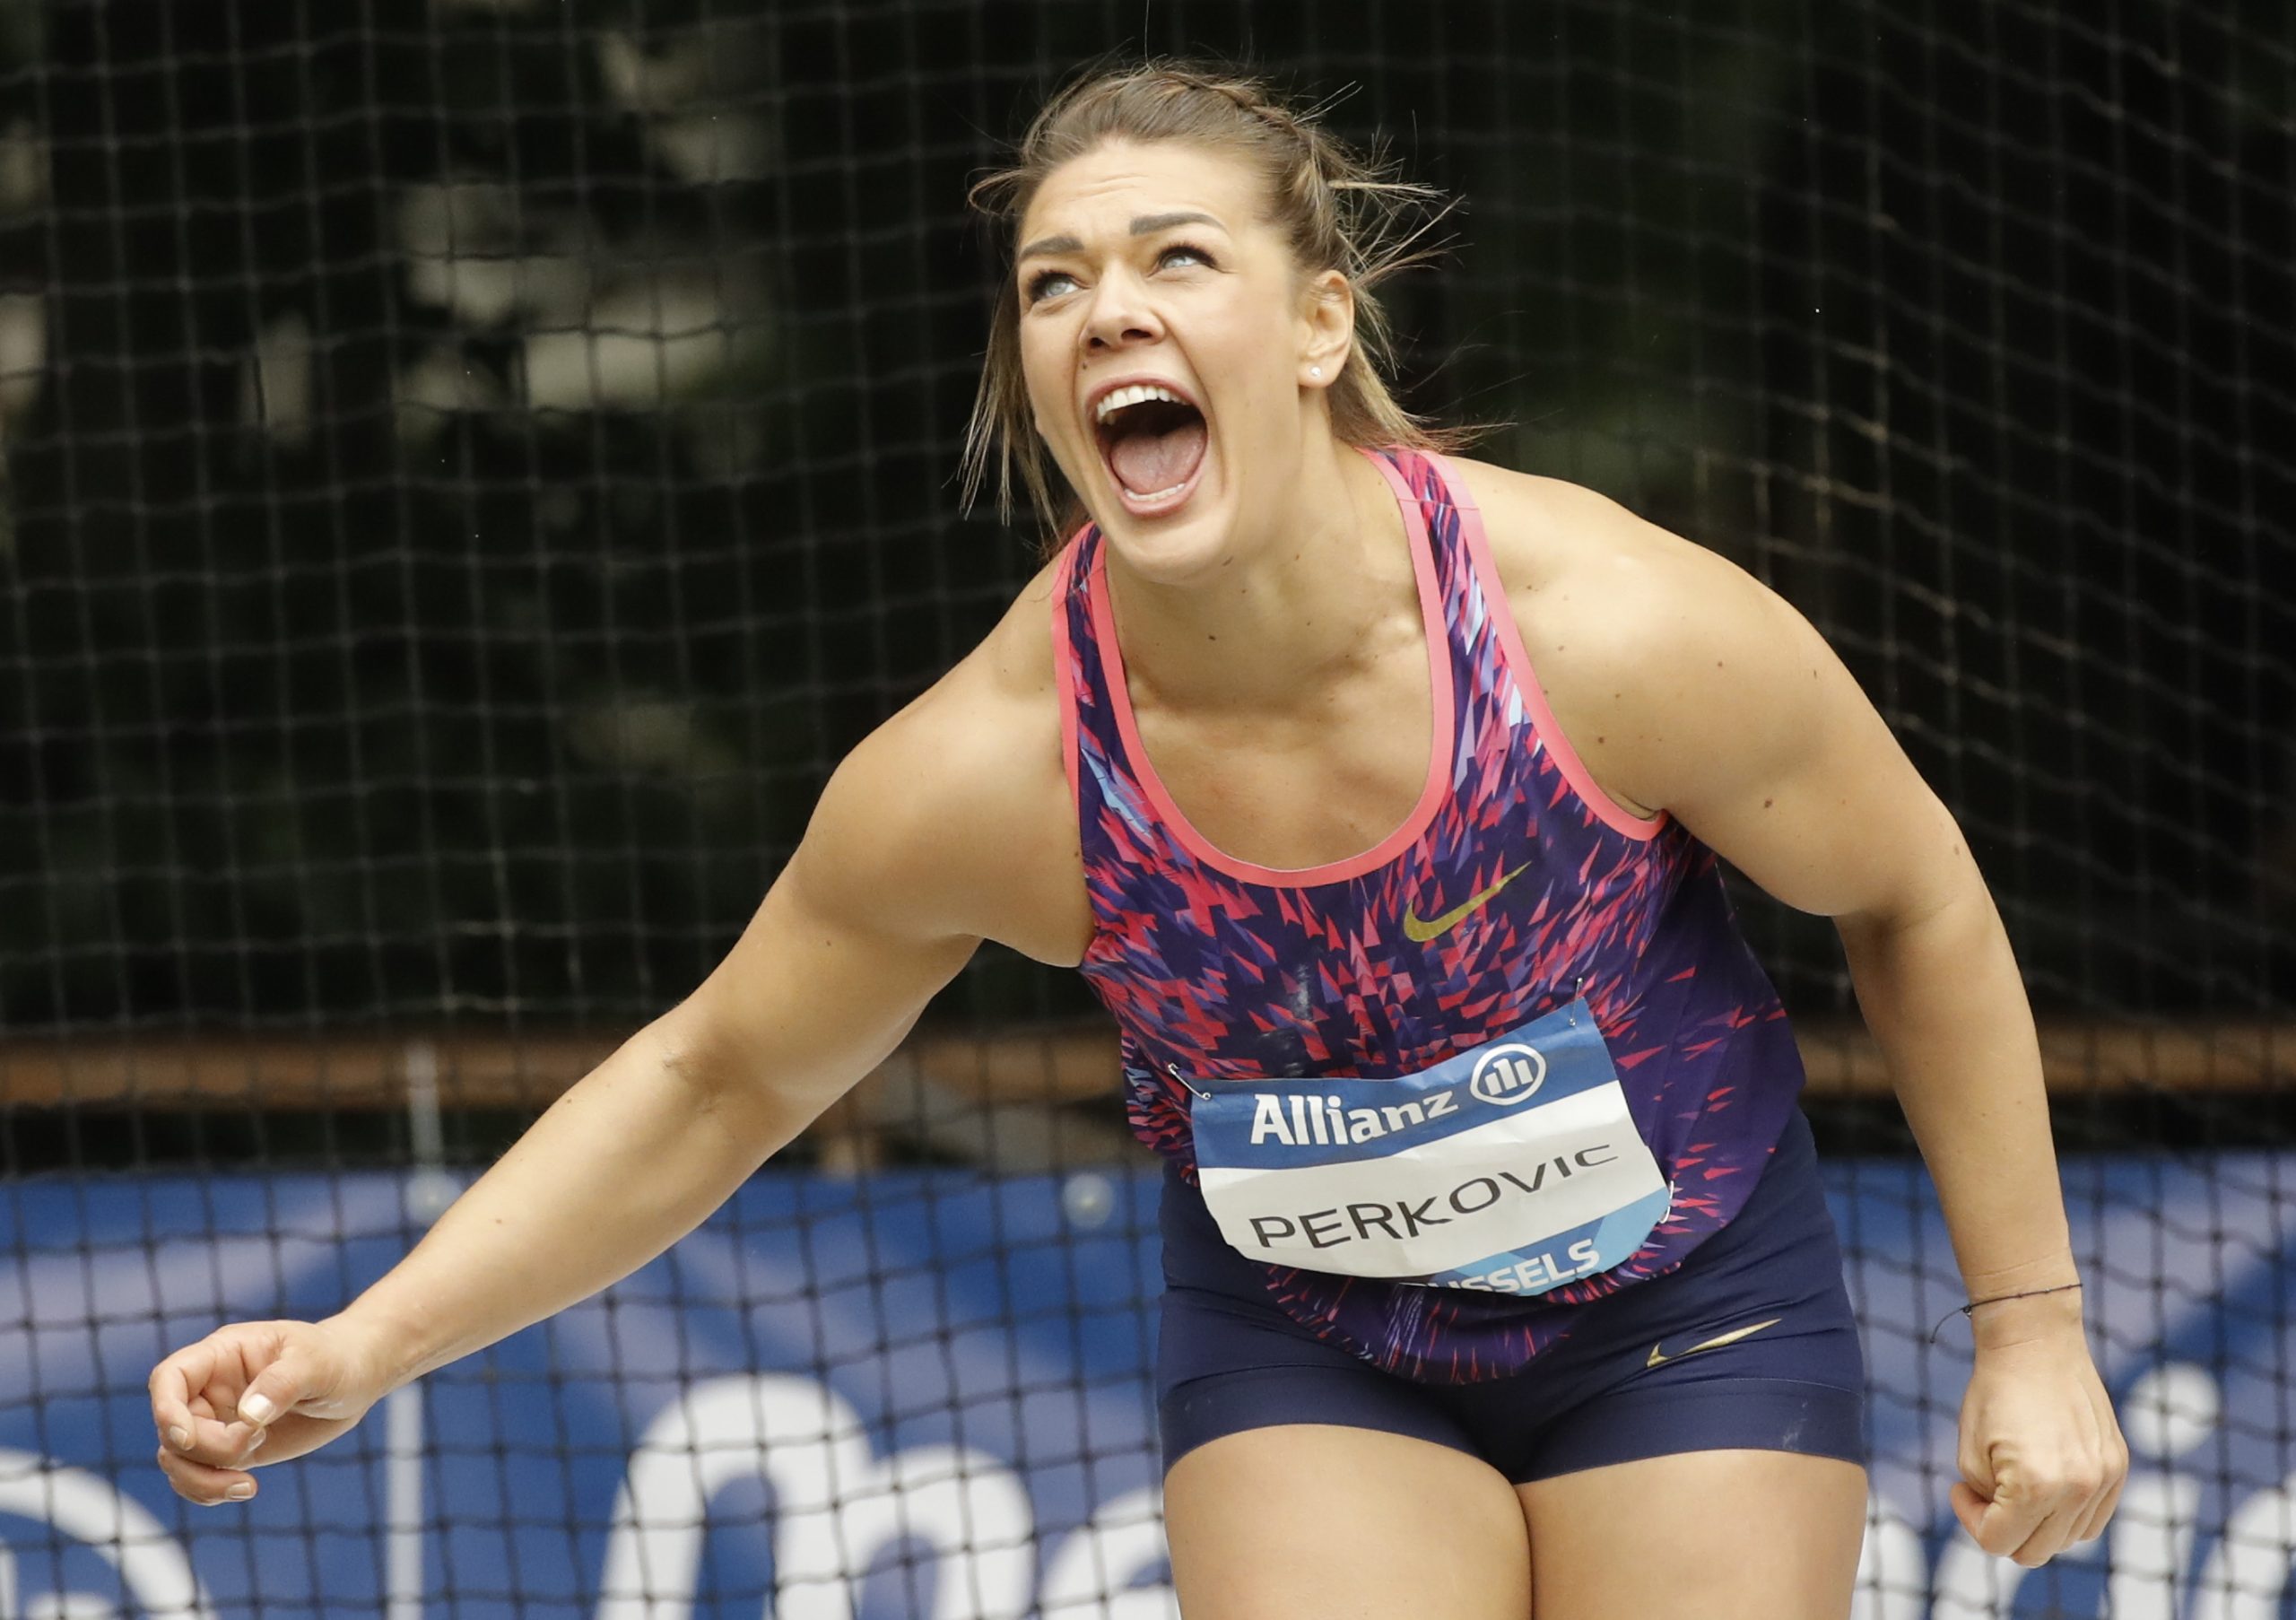 epa09440791 Sandra Perkovic of Croatia in action during the Women's Discus throw competition at the IAAF Diamond League Memorial Van Damme athletics meeting at La Camber Park in Brussels, Belgium, 01 September 2021.  EPA/OLIVIER HOSLET